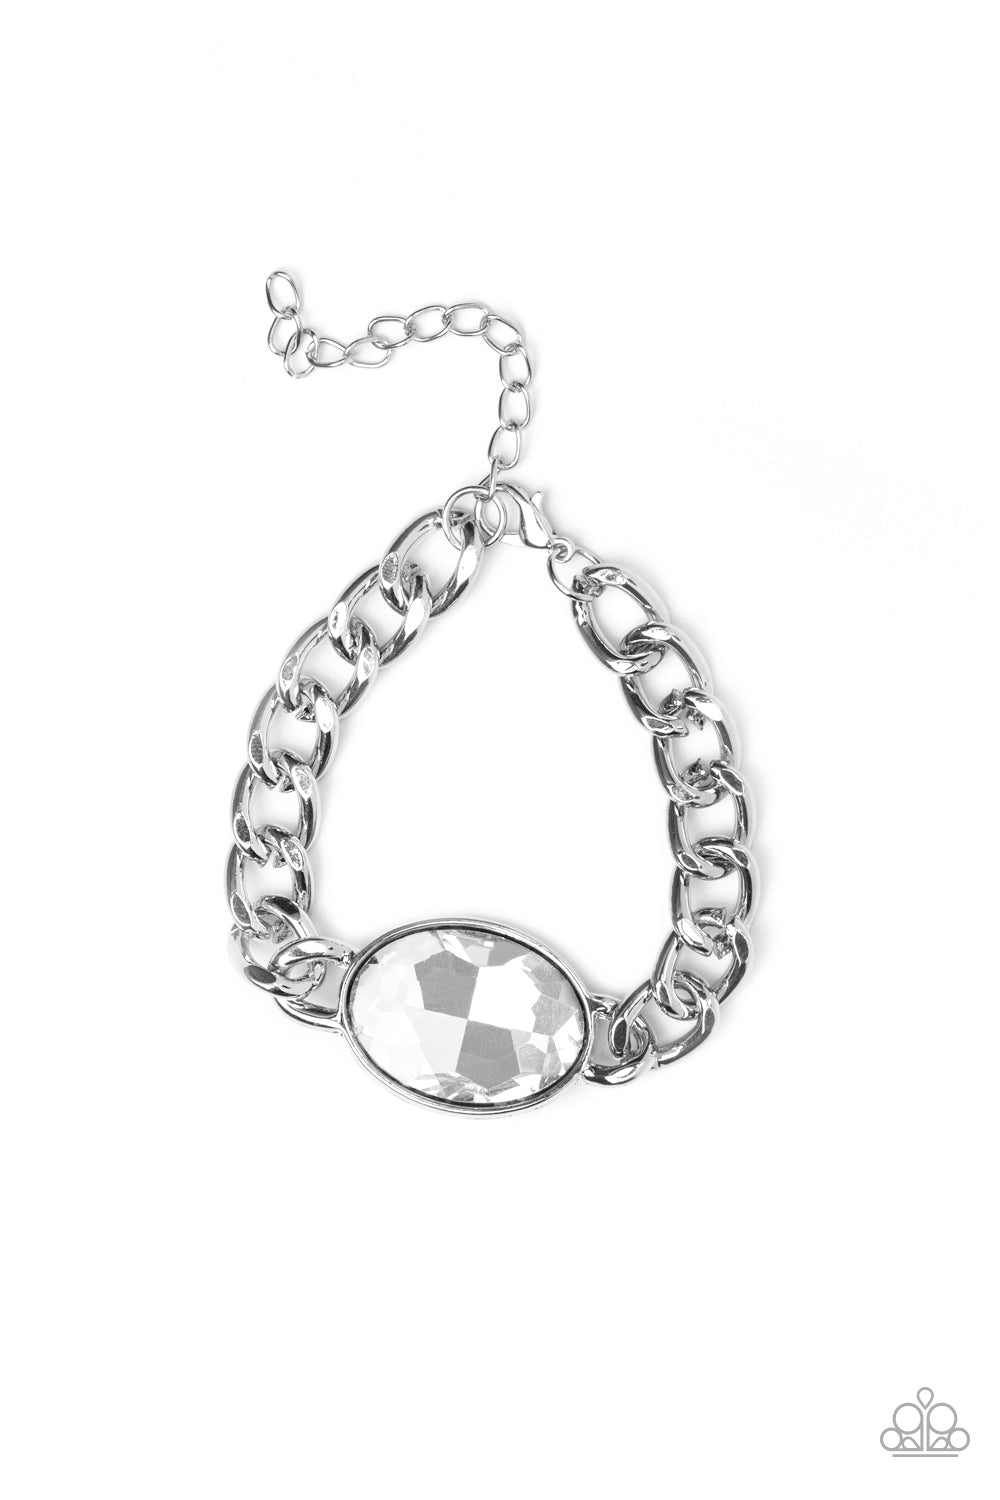  A bold statement, silver chain bracelet with a large stone in the center. Great for that special occassion. 